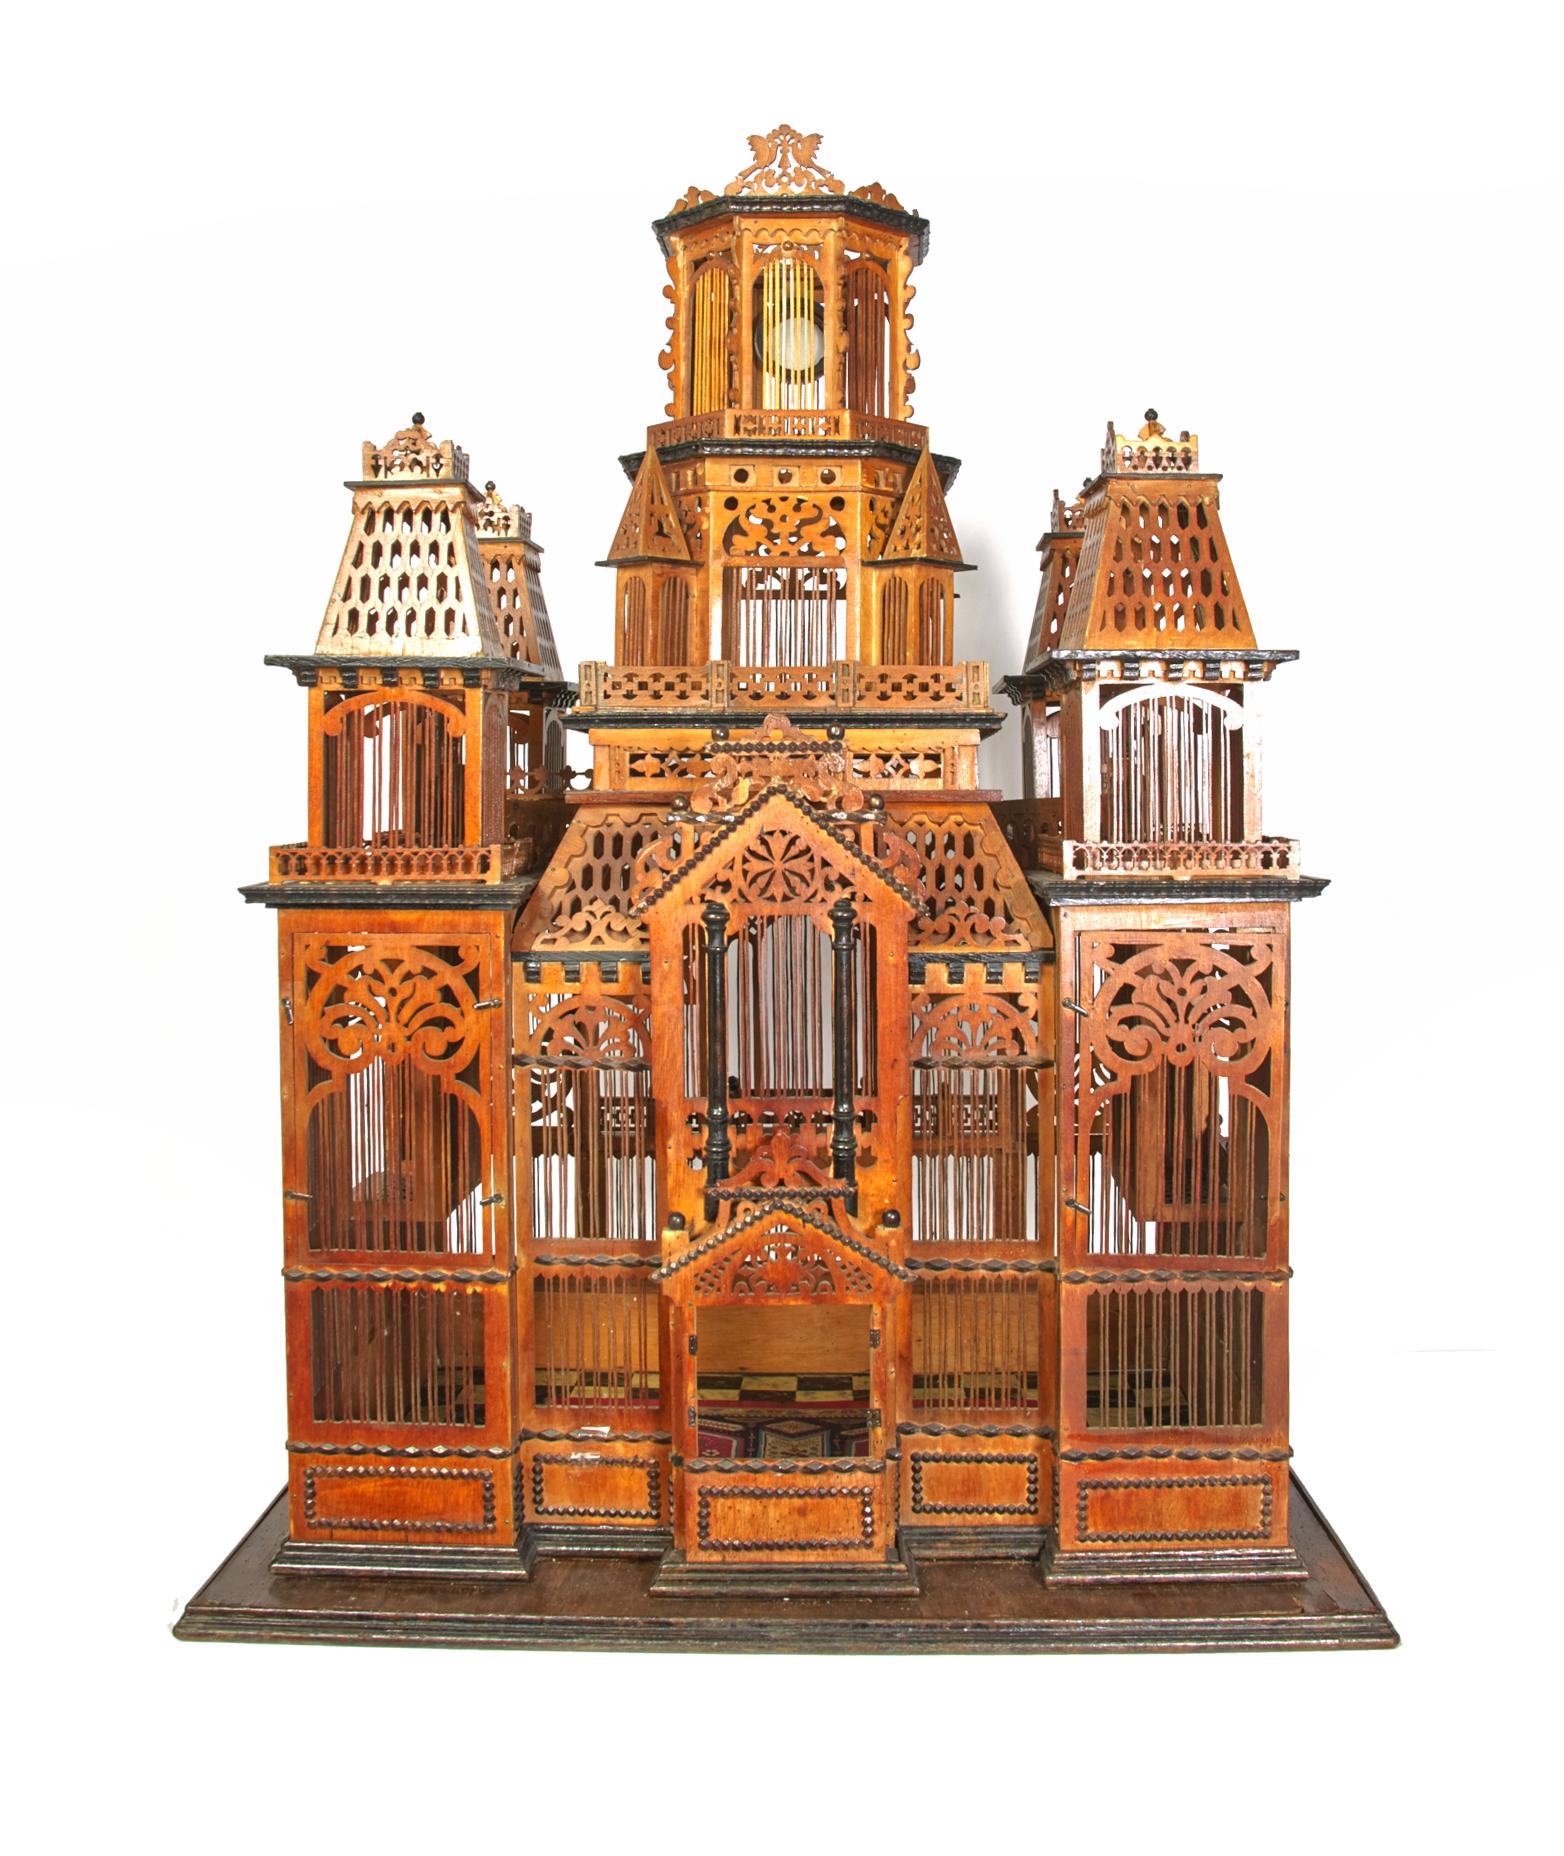 Gothic Exceptional Handmade Walnut Wood Birdcage from the Collection of Paul McDonald